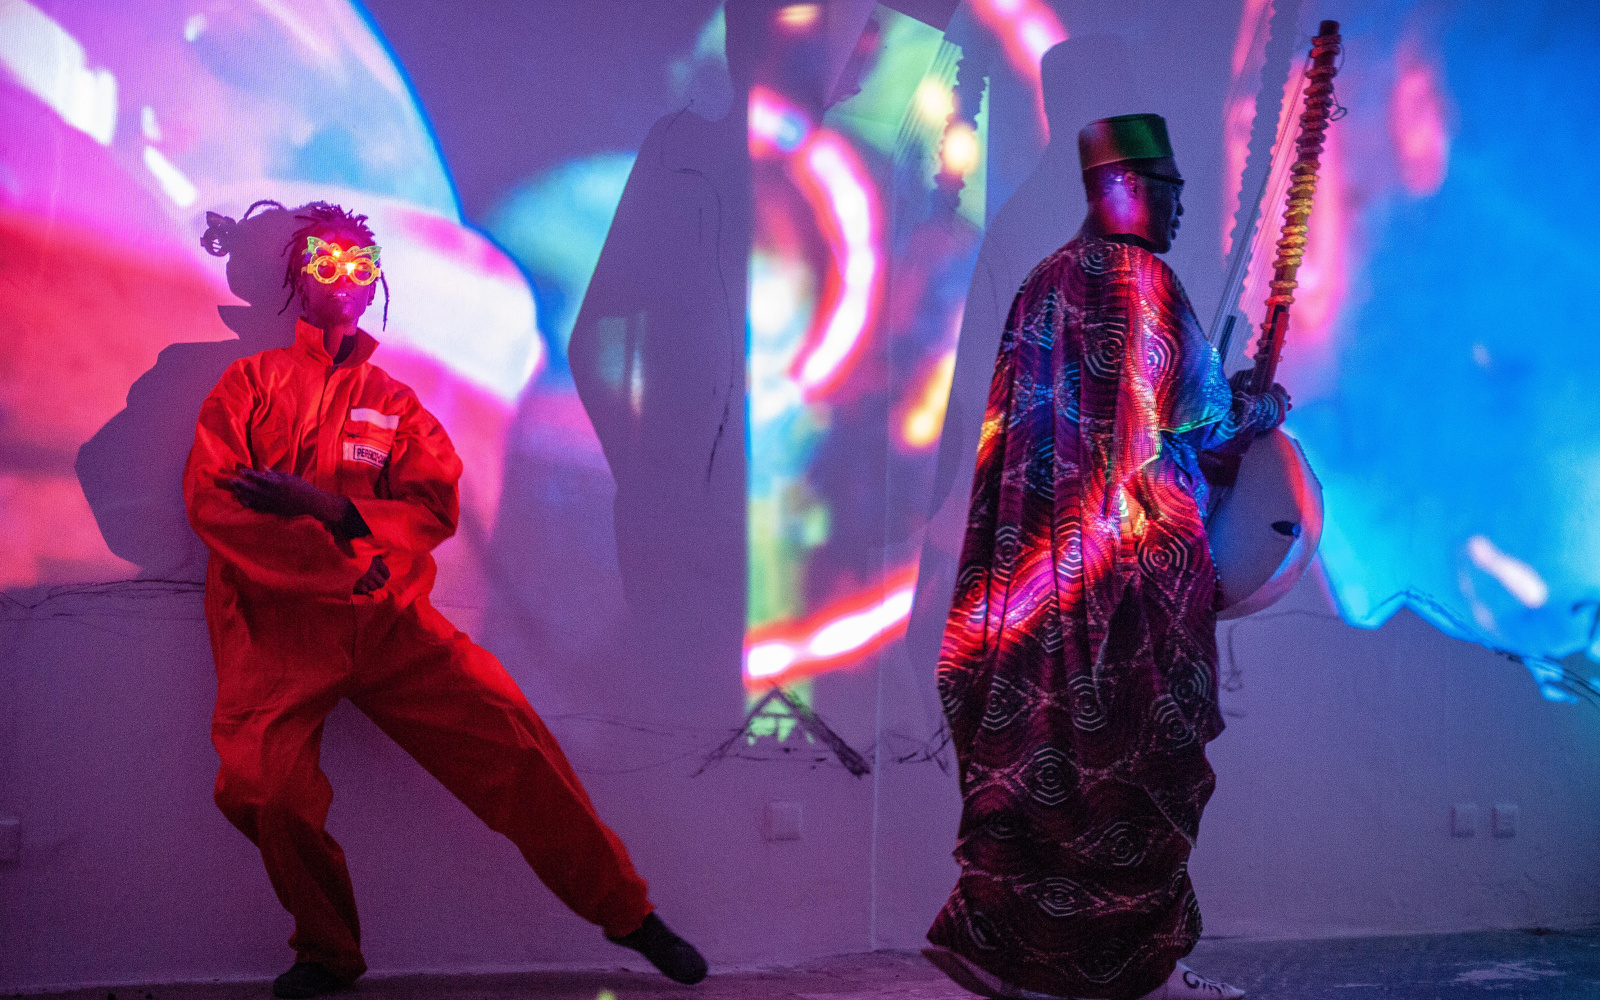 You can see two people illuminated by colorful projections. The left person wears fancy glasses and an orange jumpsuit, the right person wears a traditional robe and has an instrument in his hand.